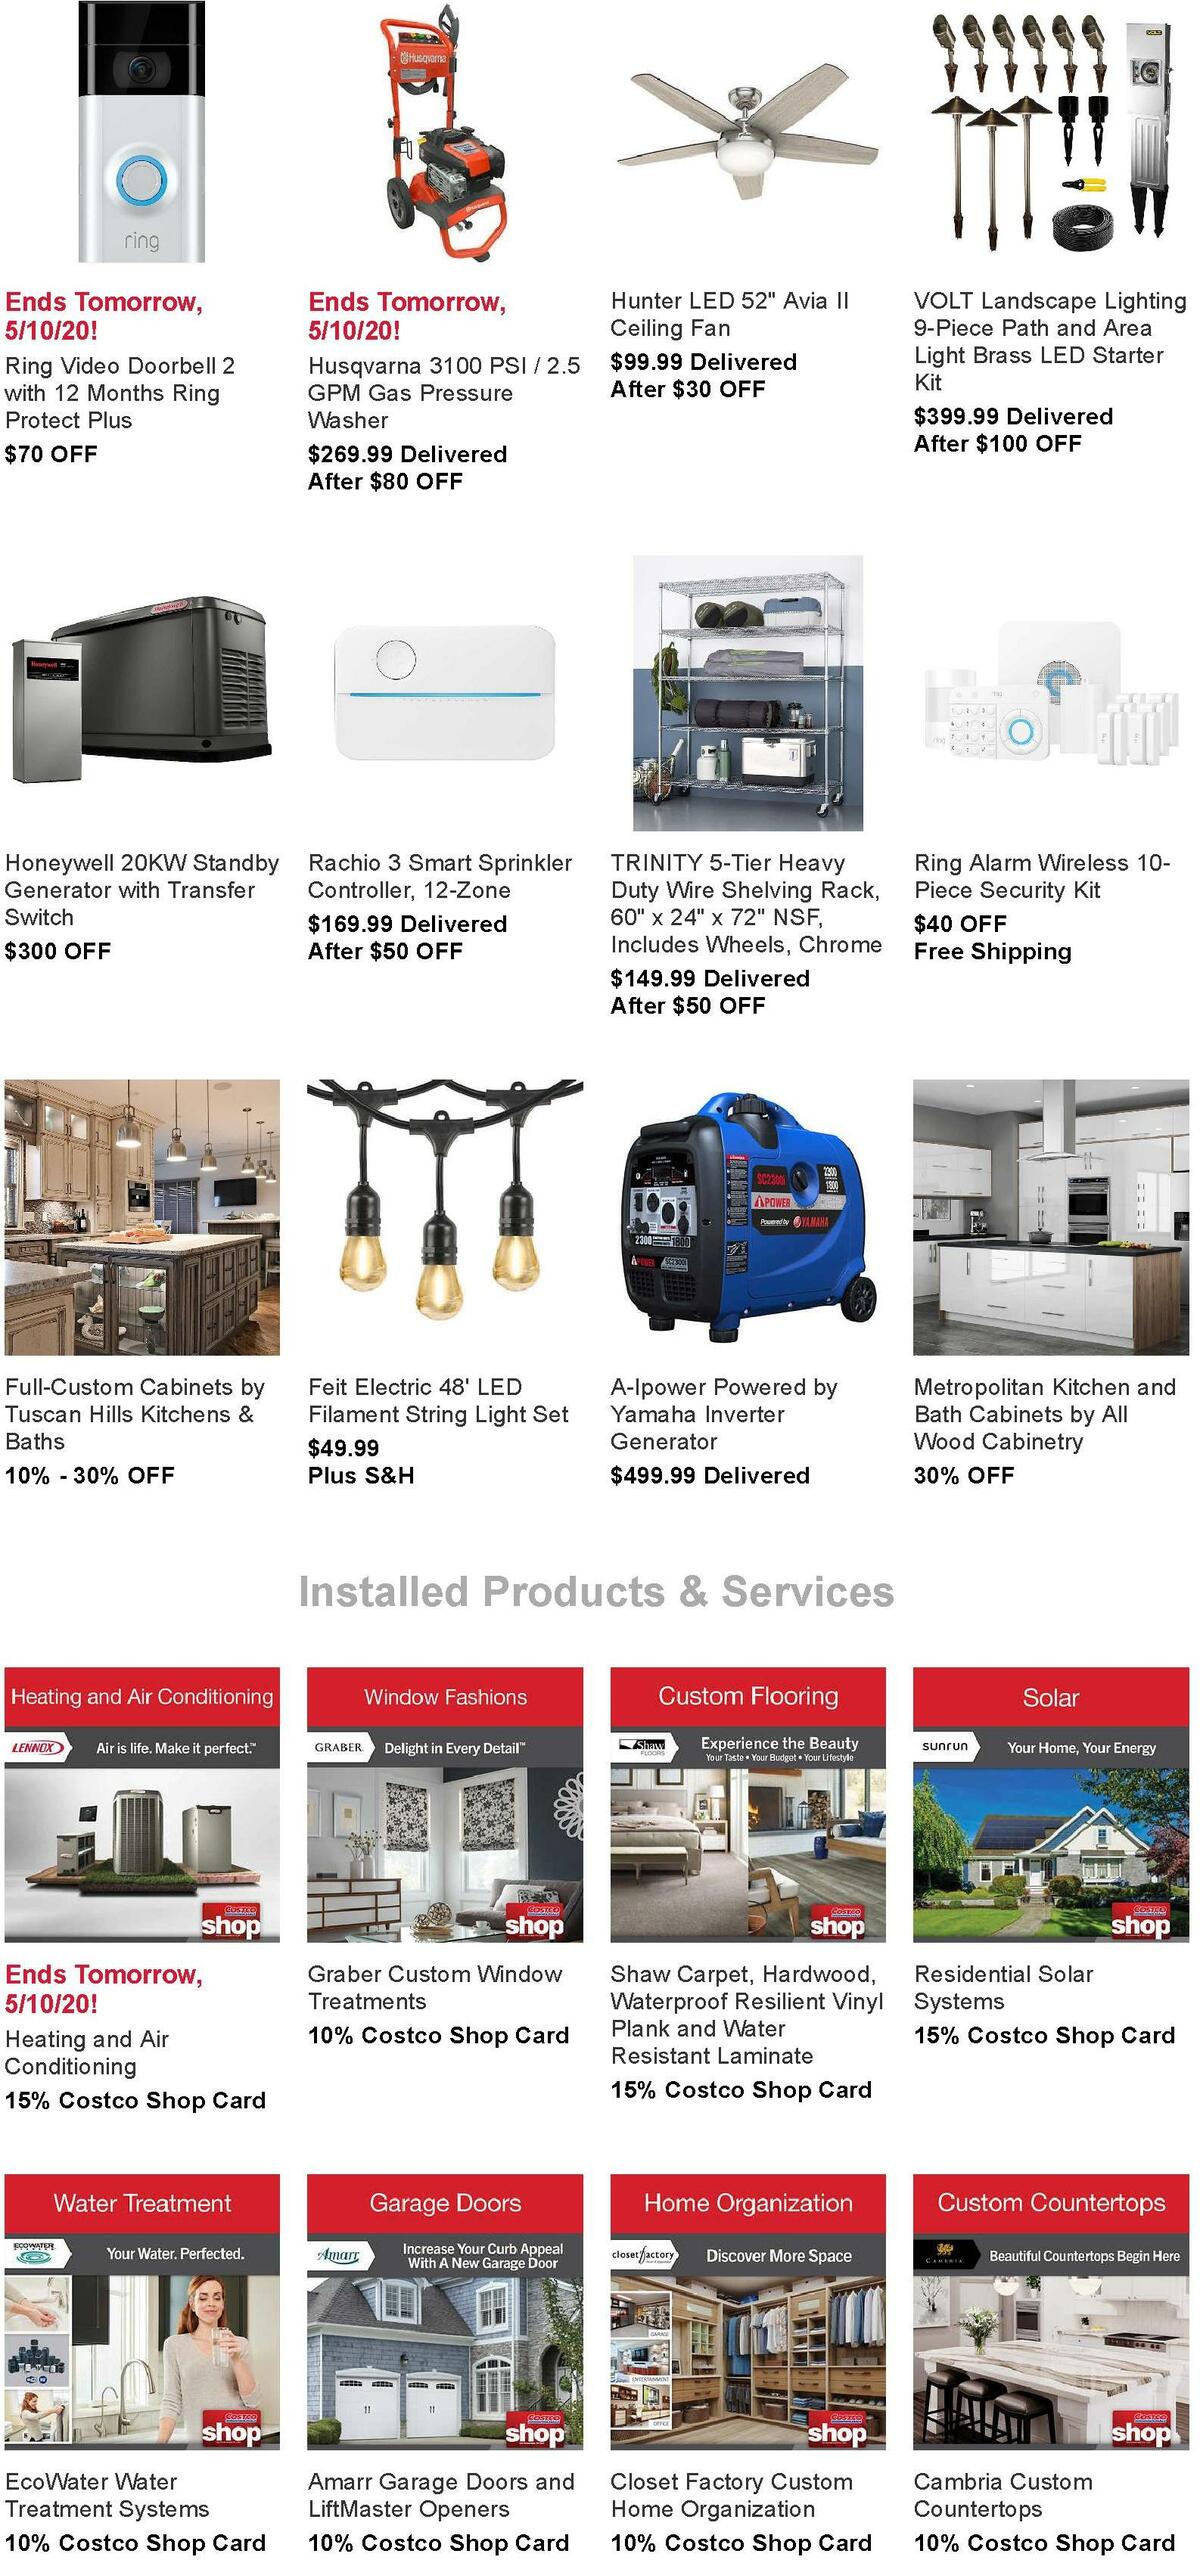 Costco Hot Buys Weekly Ad from May 9